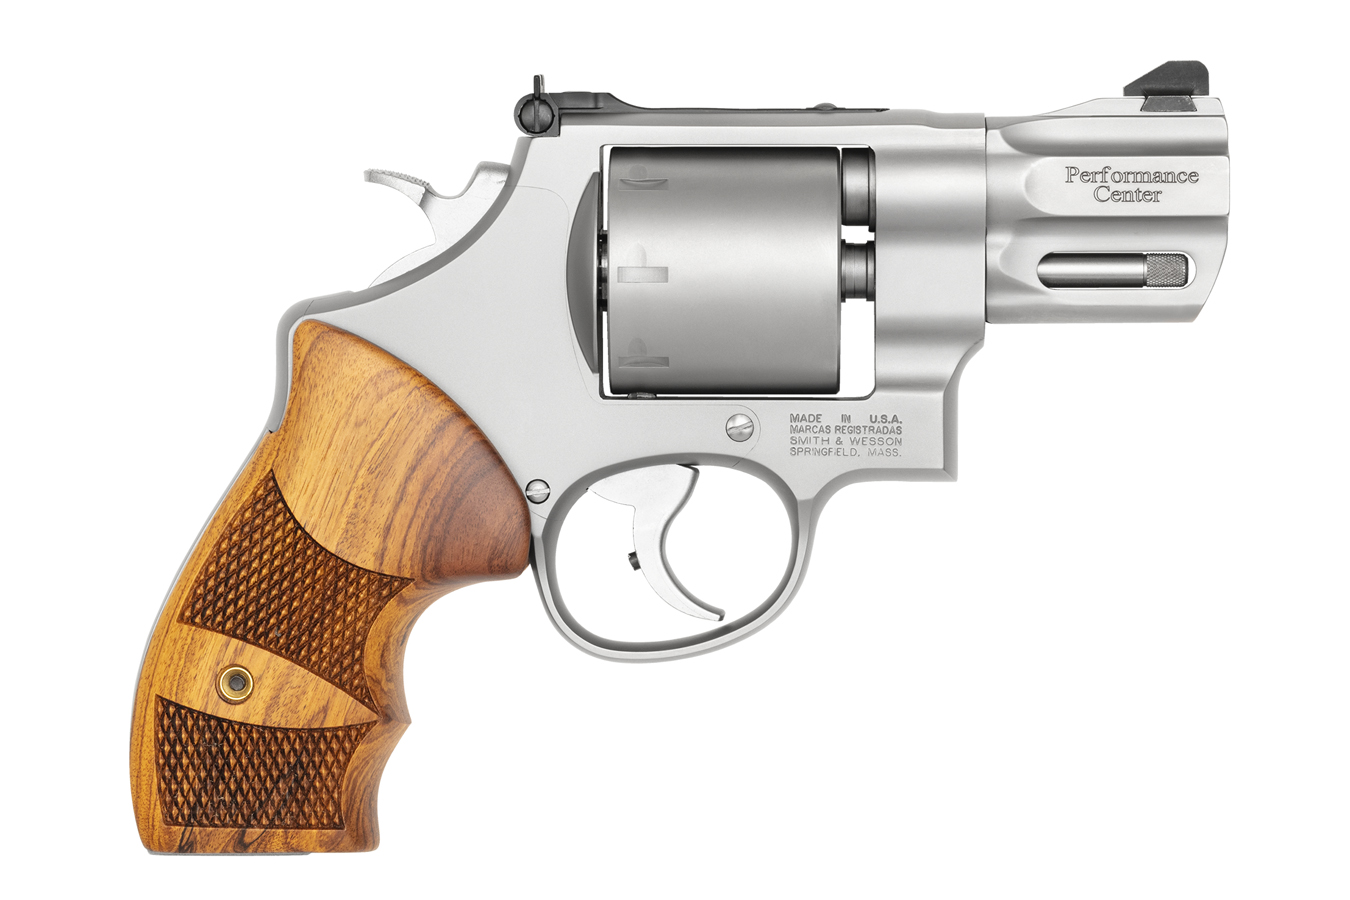 SMITH AND WESSON 627 PERFORMANCE CENTER 357 MAGNUM 8-SHOT